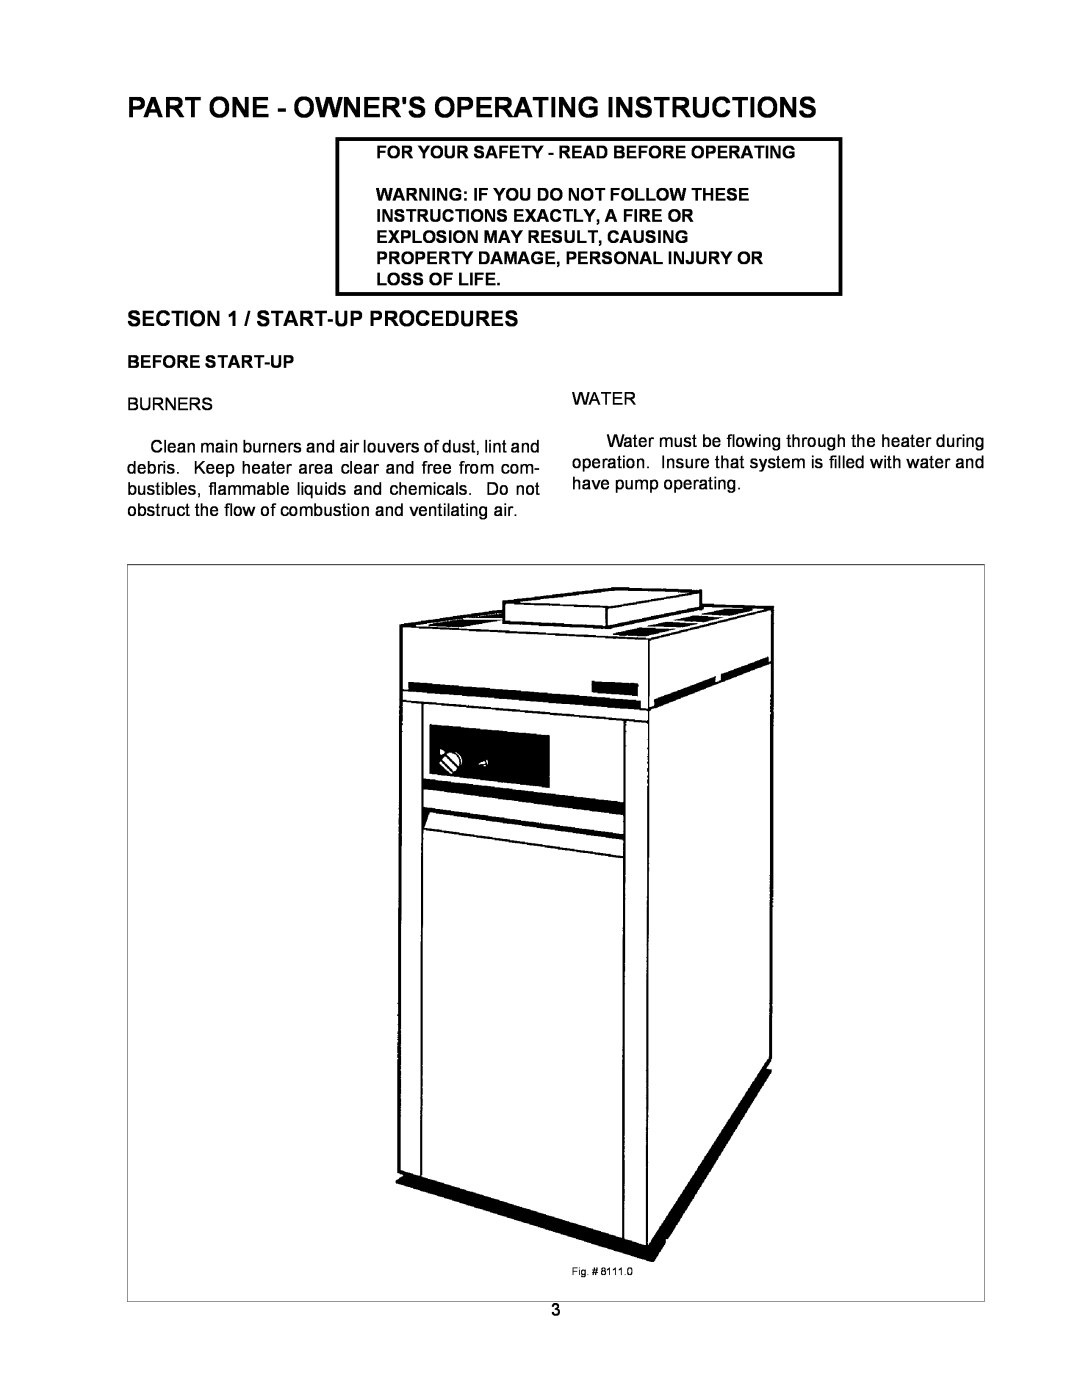 Raypak 155C installation instructions Part One - Owners Operating Instructions, Start-Up Procedures 